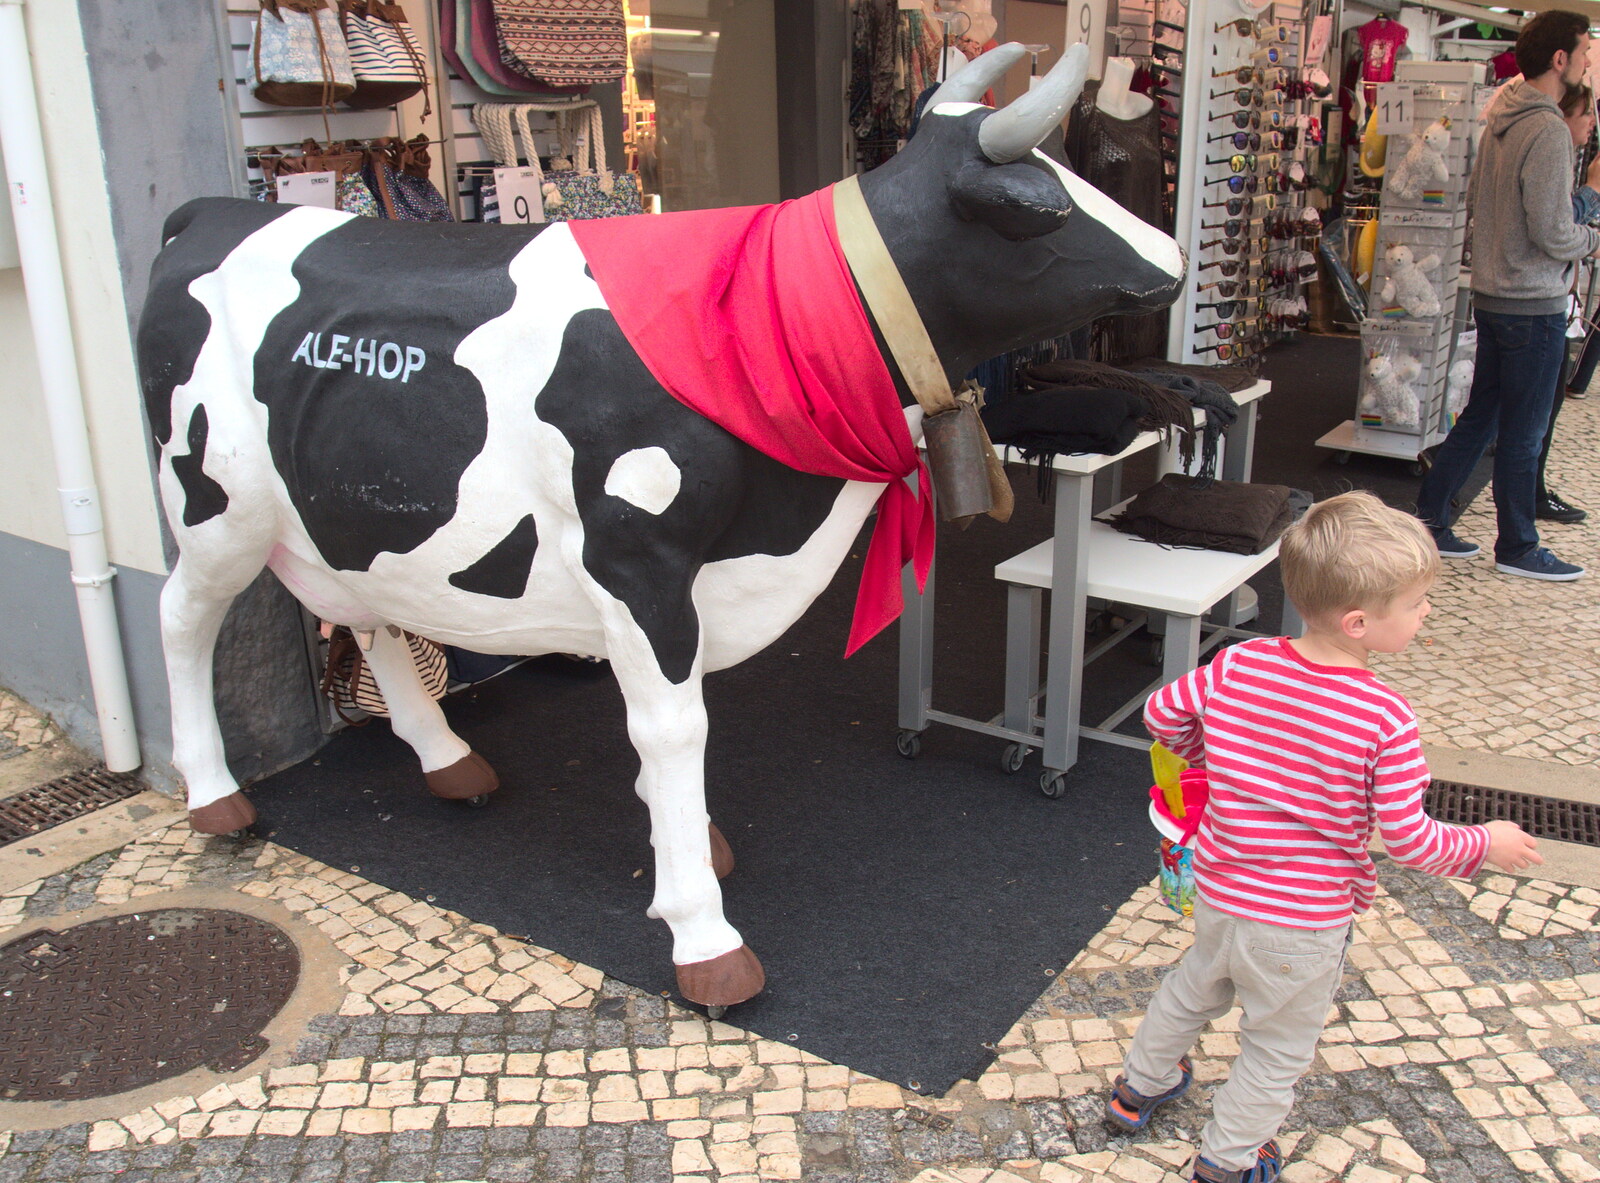 Harry by an Ale-Hop cow from A Trip to Albufeira: The Hotel Paraiso, Portugal - 3rd April 2016